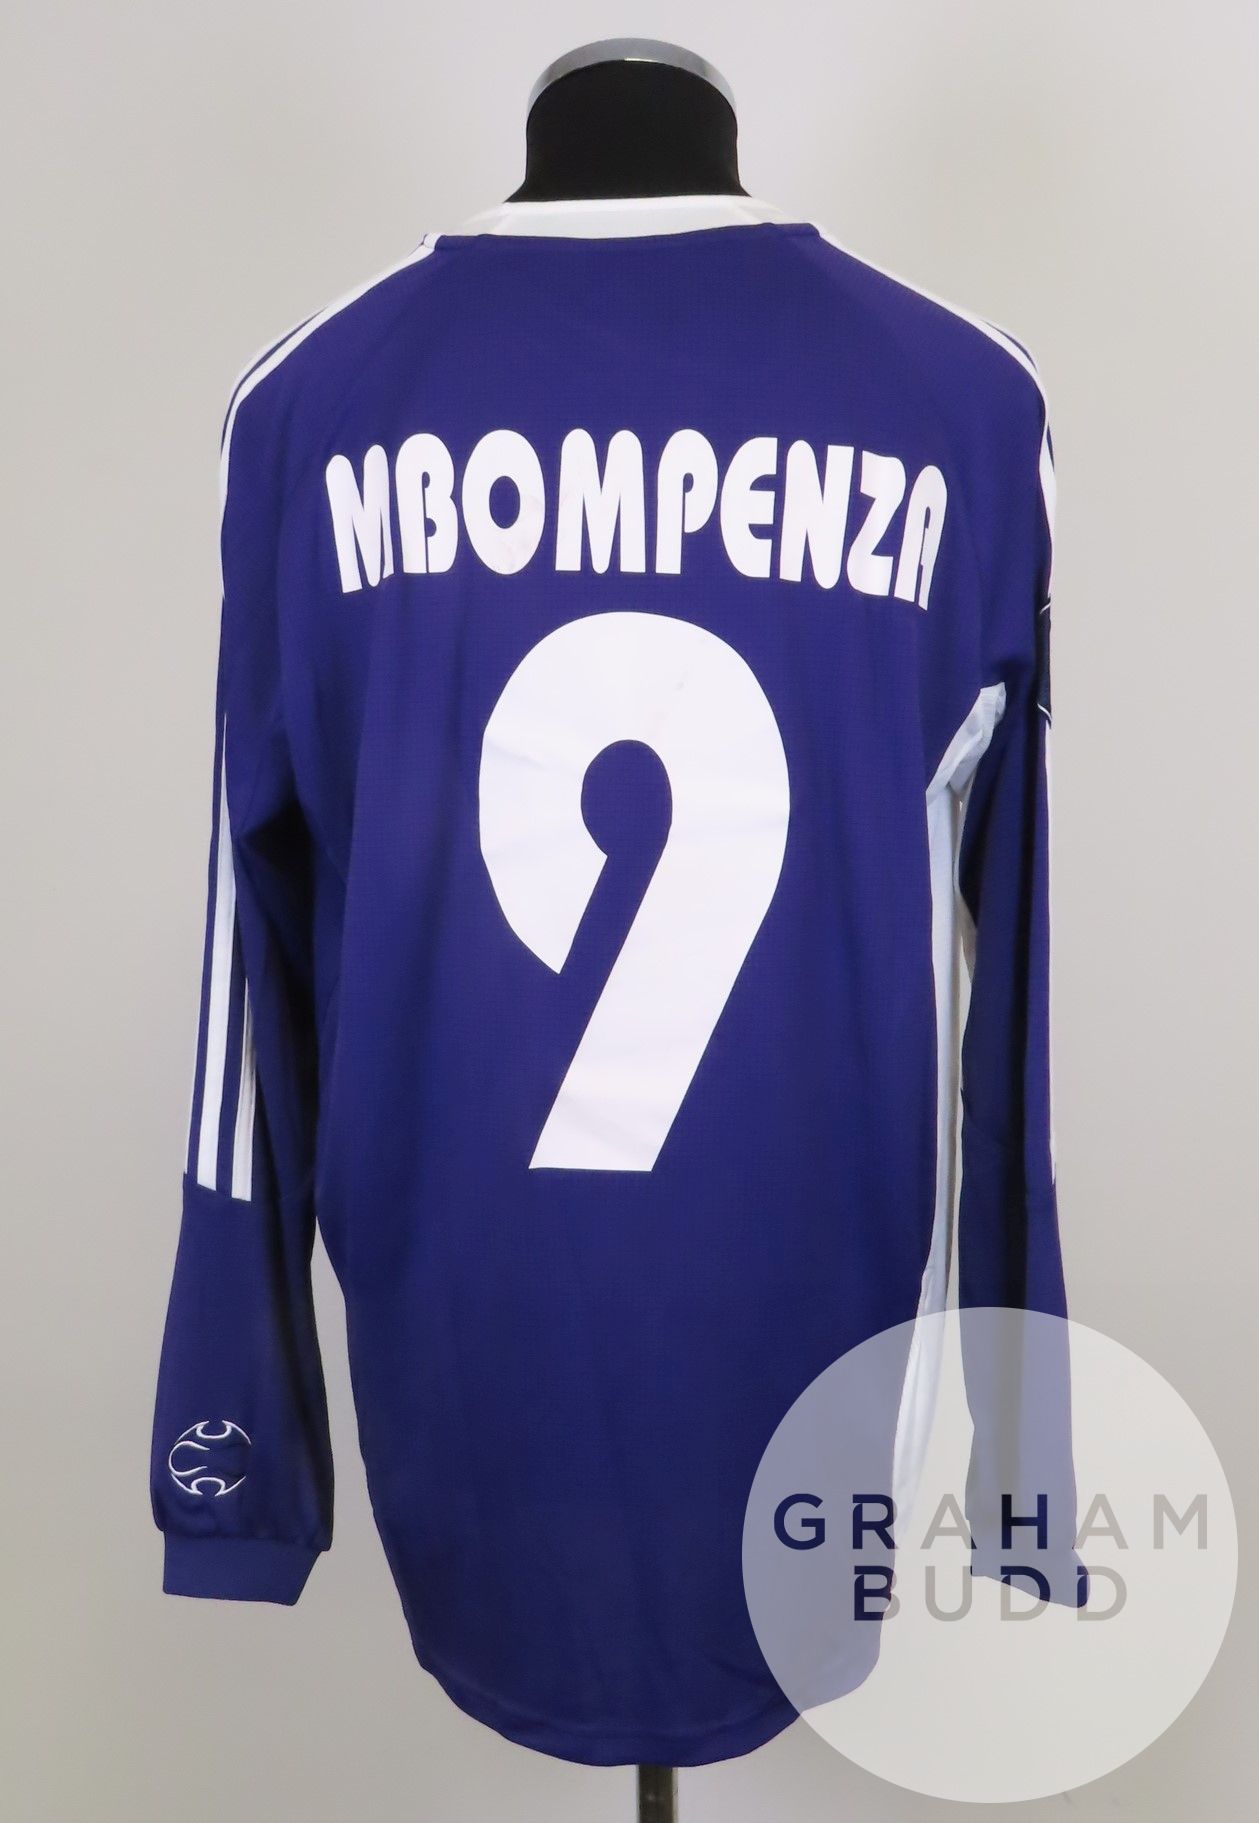 Mbo Mpenza purple and white No.9 Anderlecht match worn long-sleeved shirt, 2007-08 - Image 2 of 2